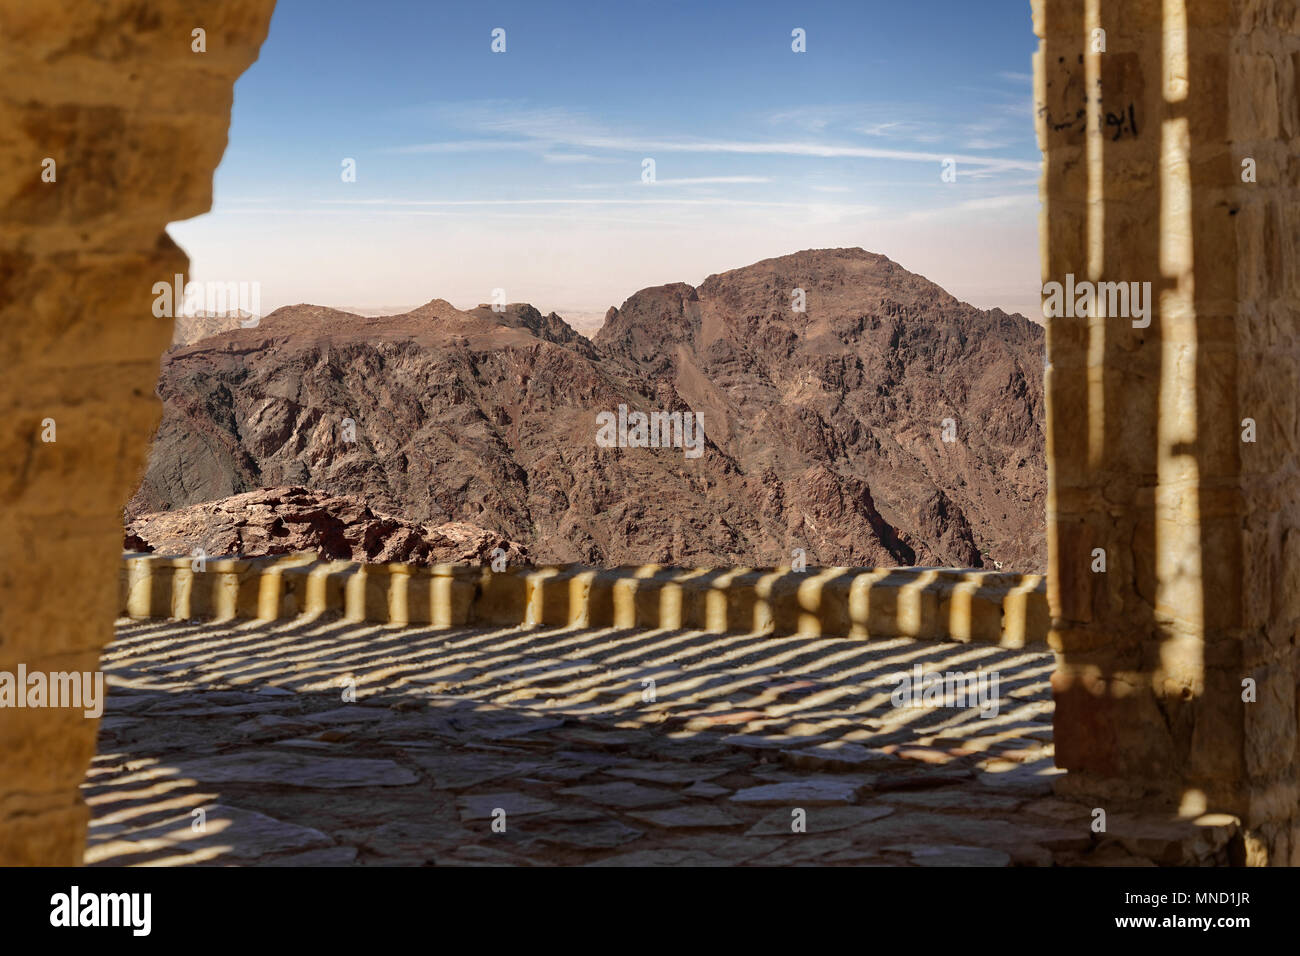 View over a terrace to the barren mountain landscape in southern Jordan, composite photograph Stock Photo